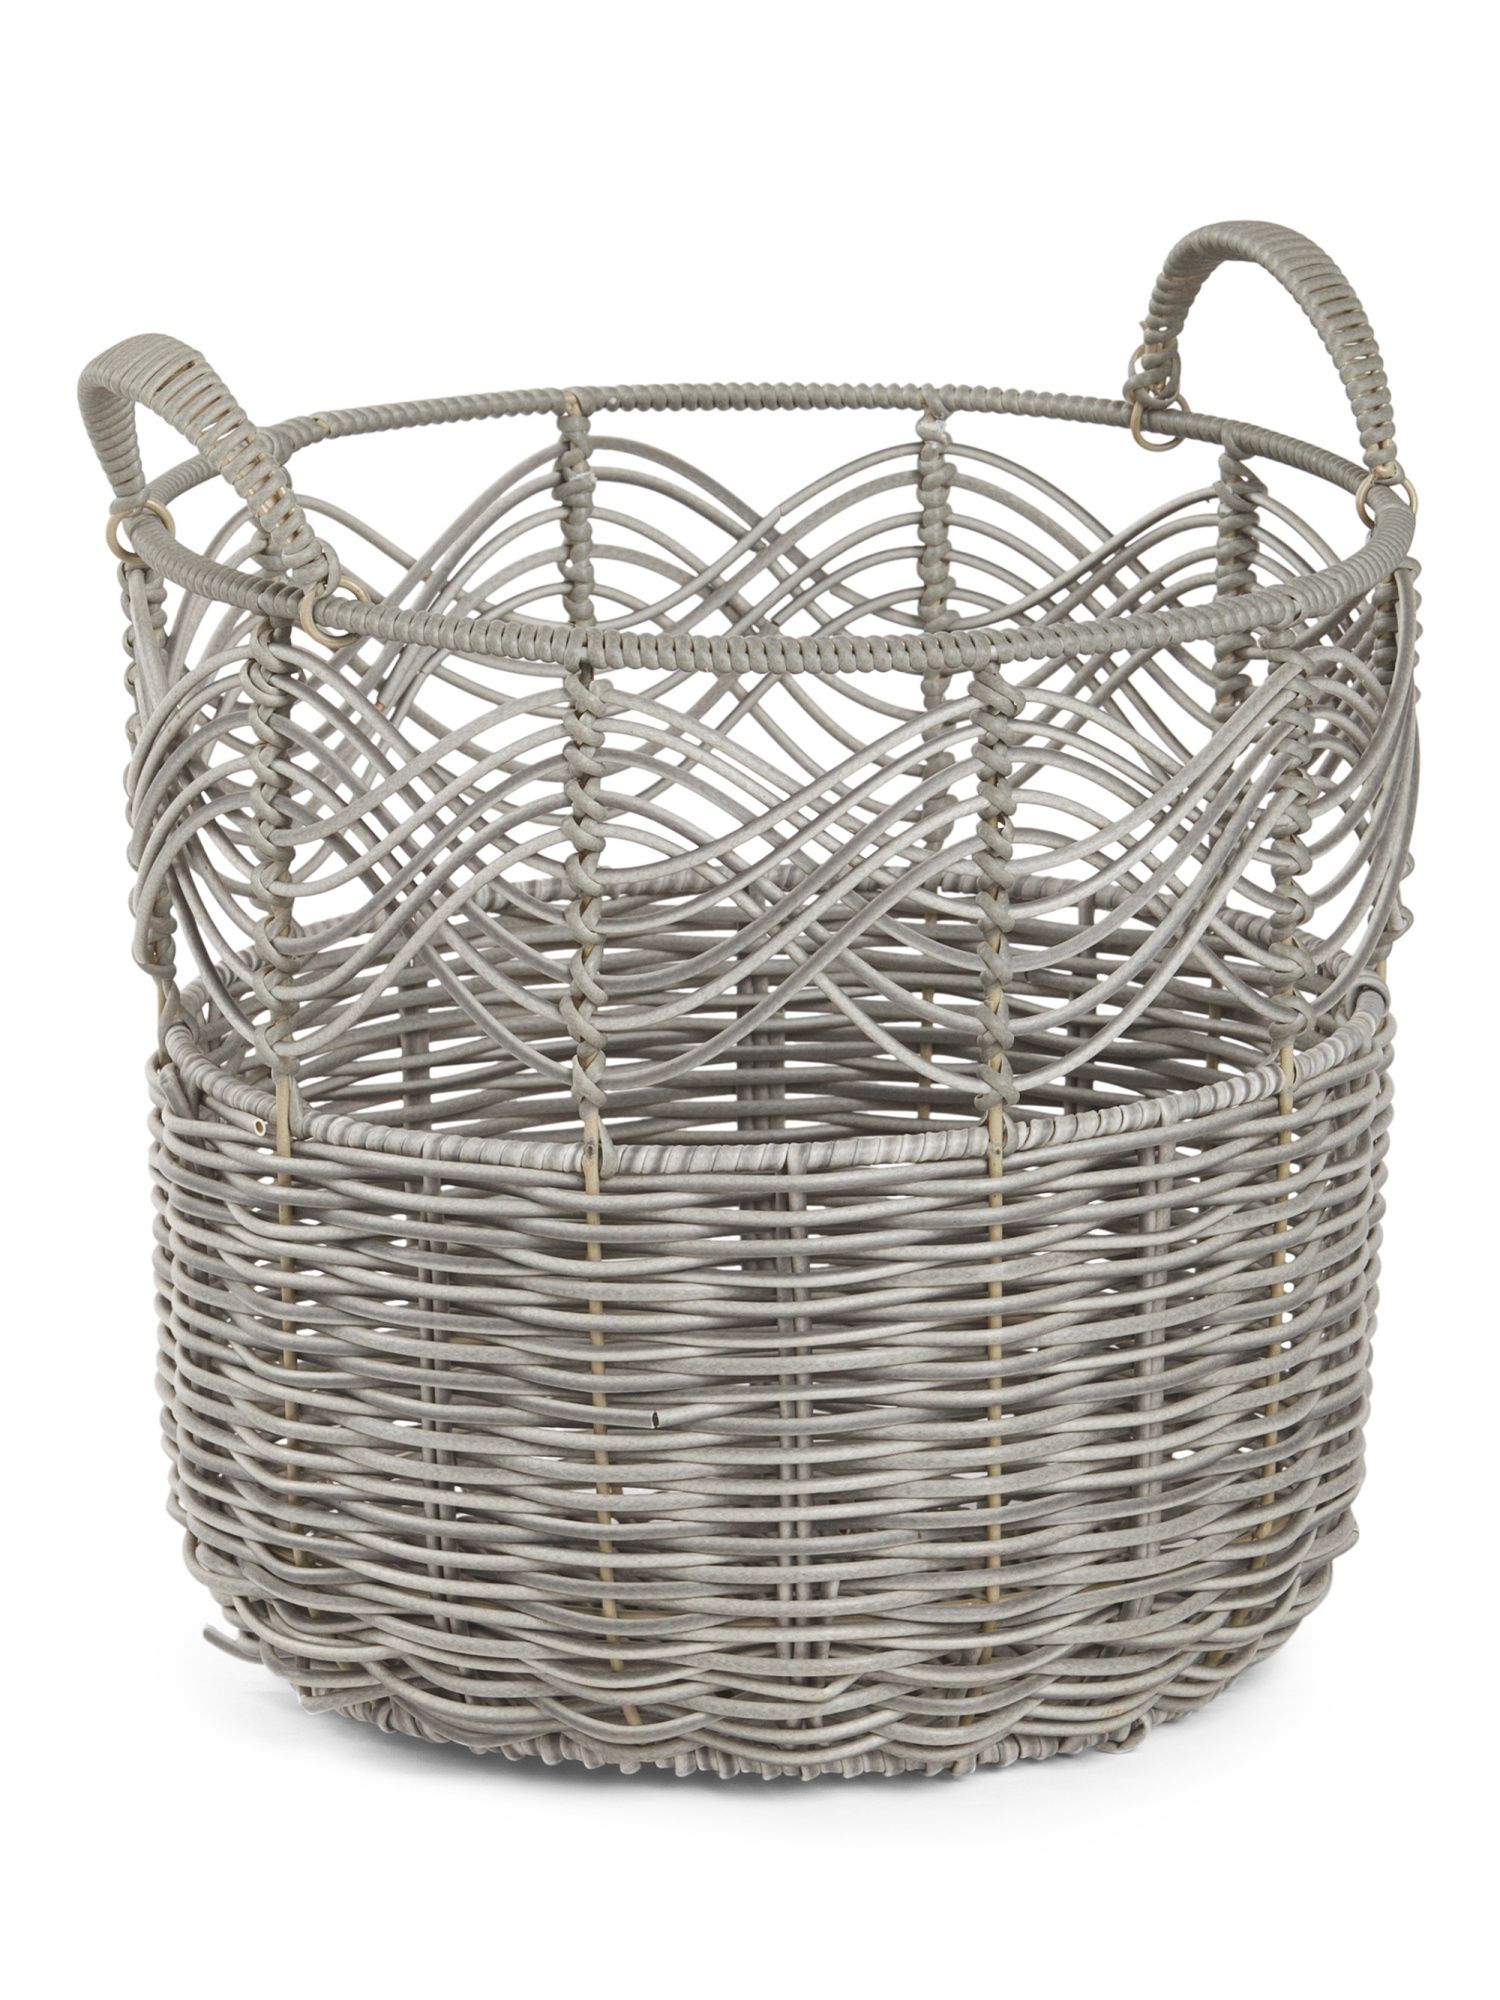 Small Round Basket With Handles | TJ Maxx